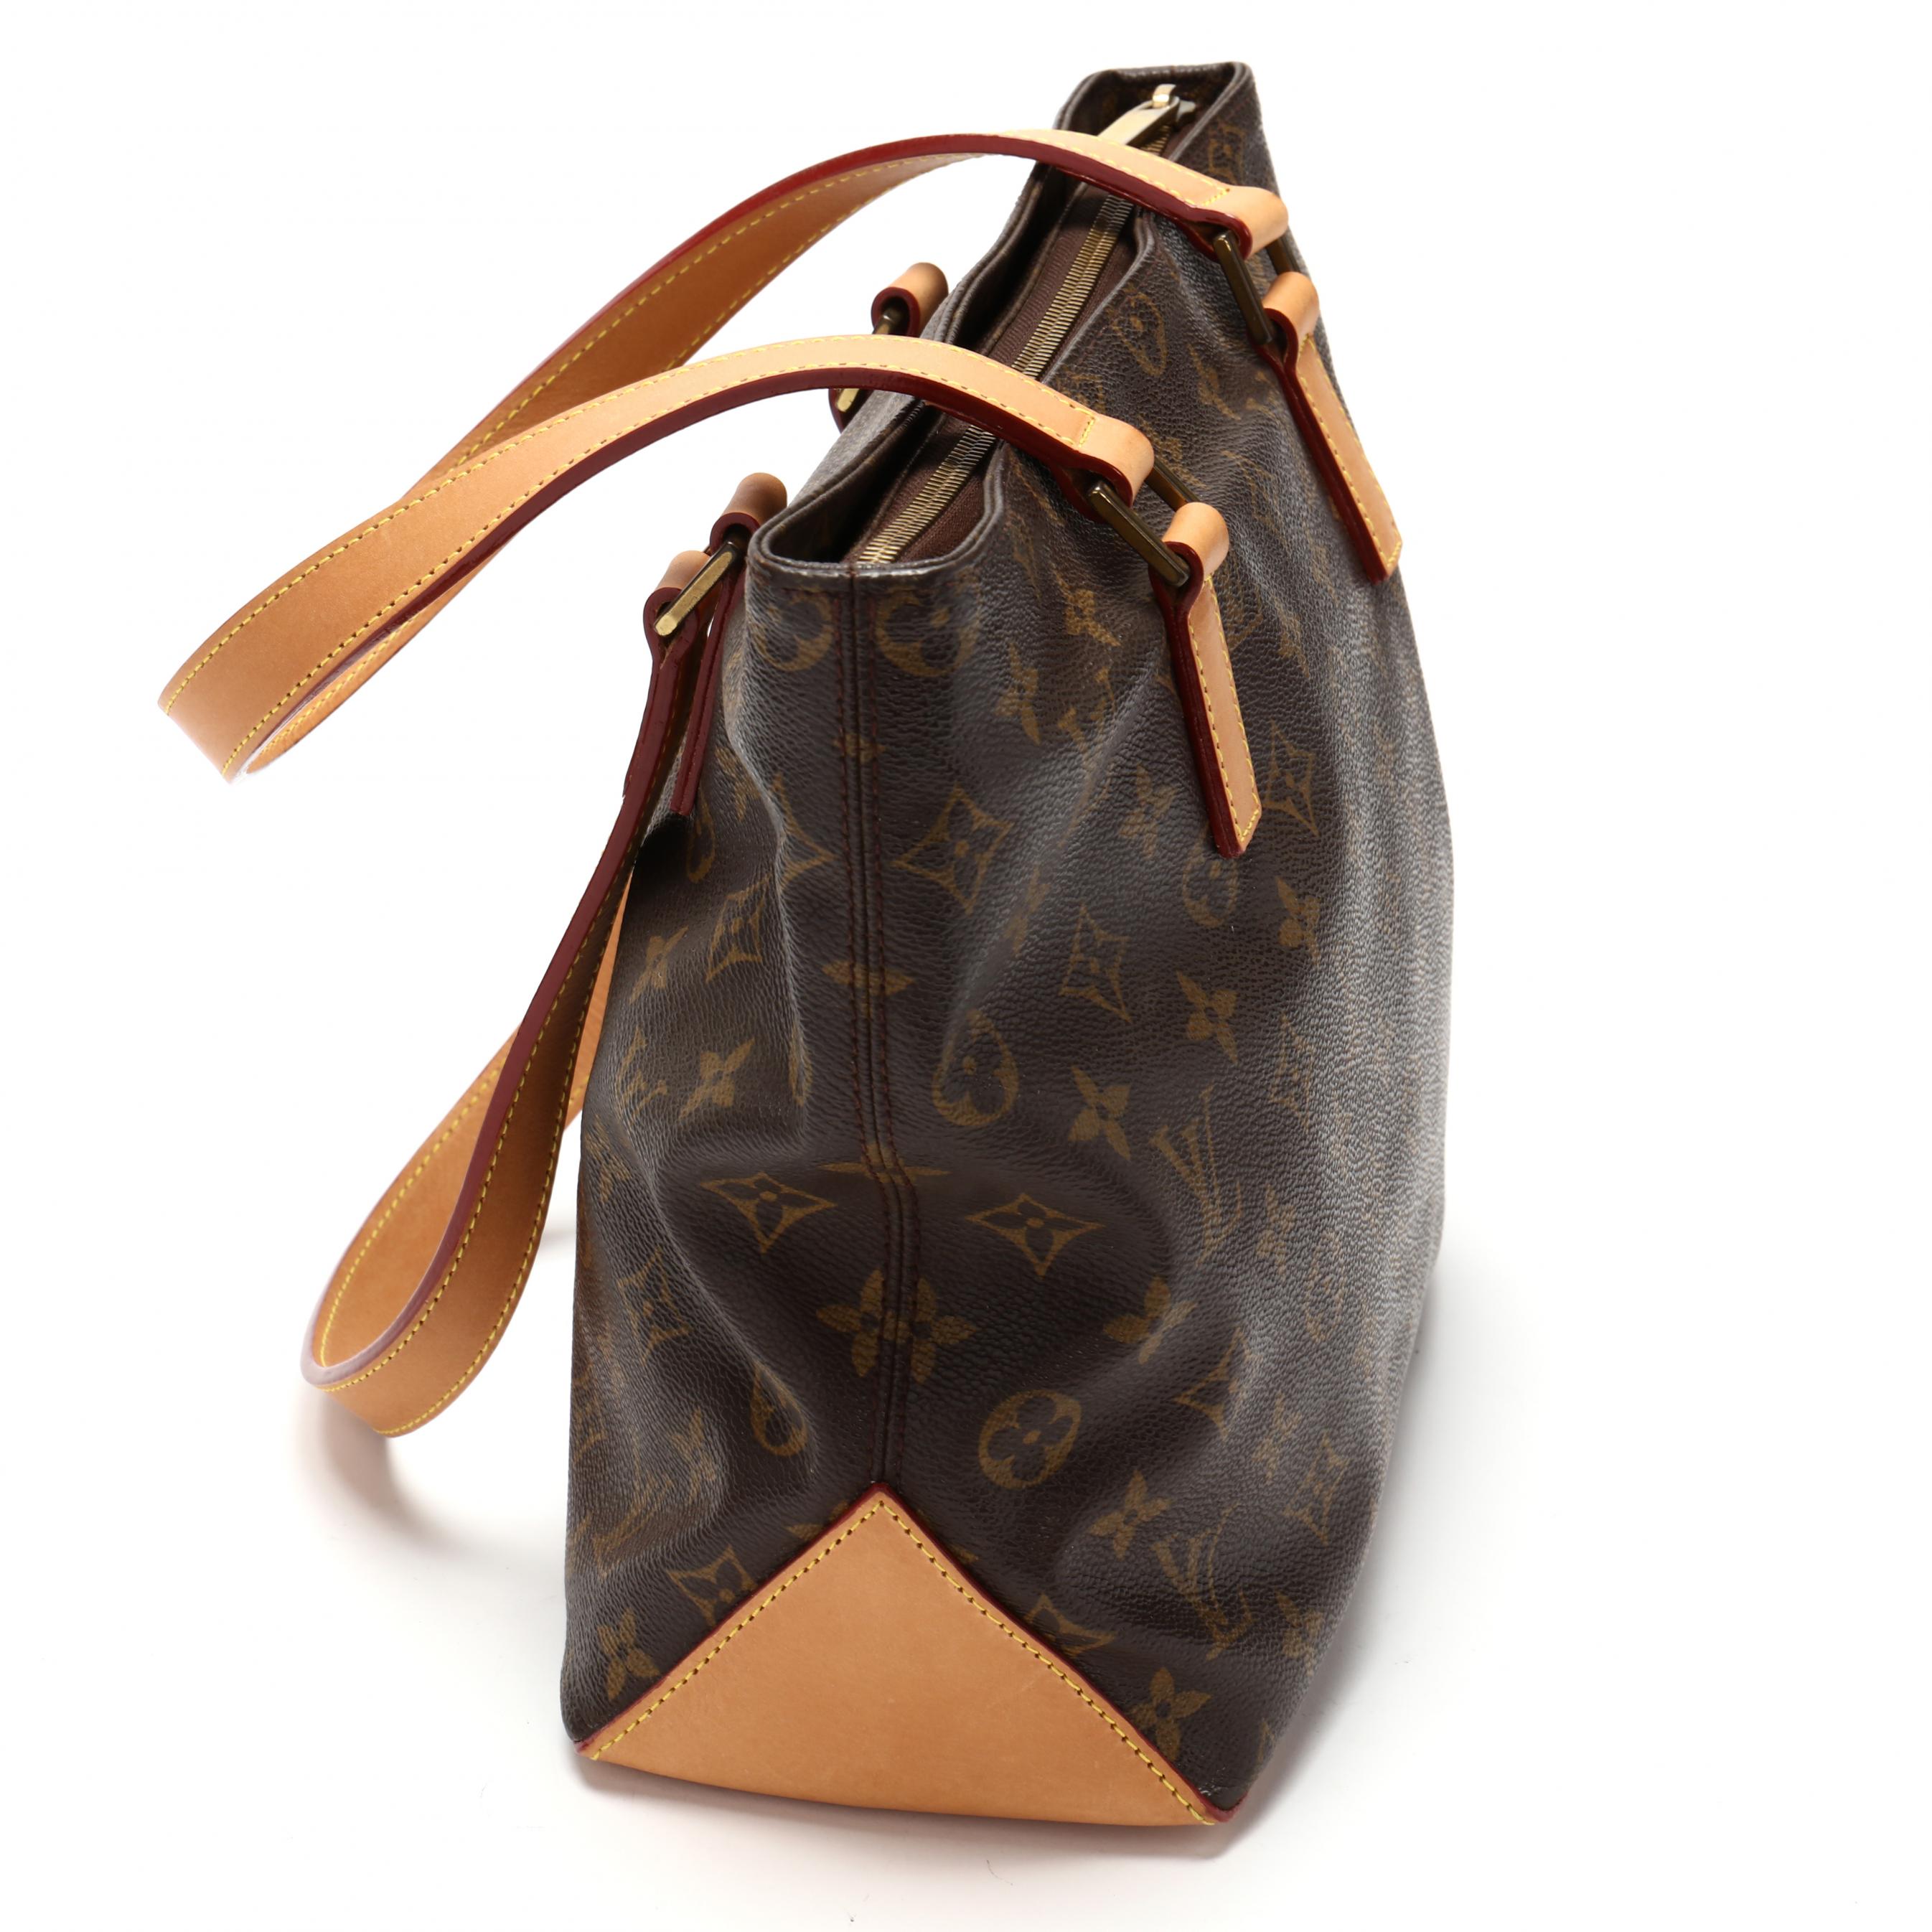 Sold at Auction: Louis Vuitton Cabas Piano Shoulder Bag, in brown